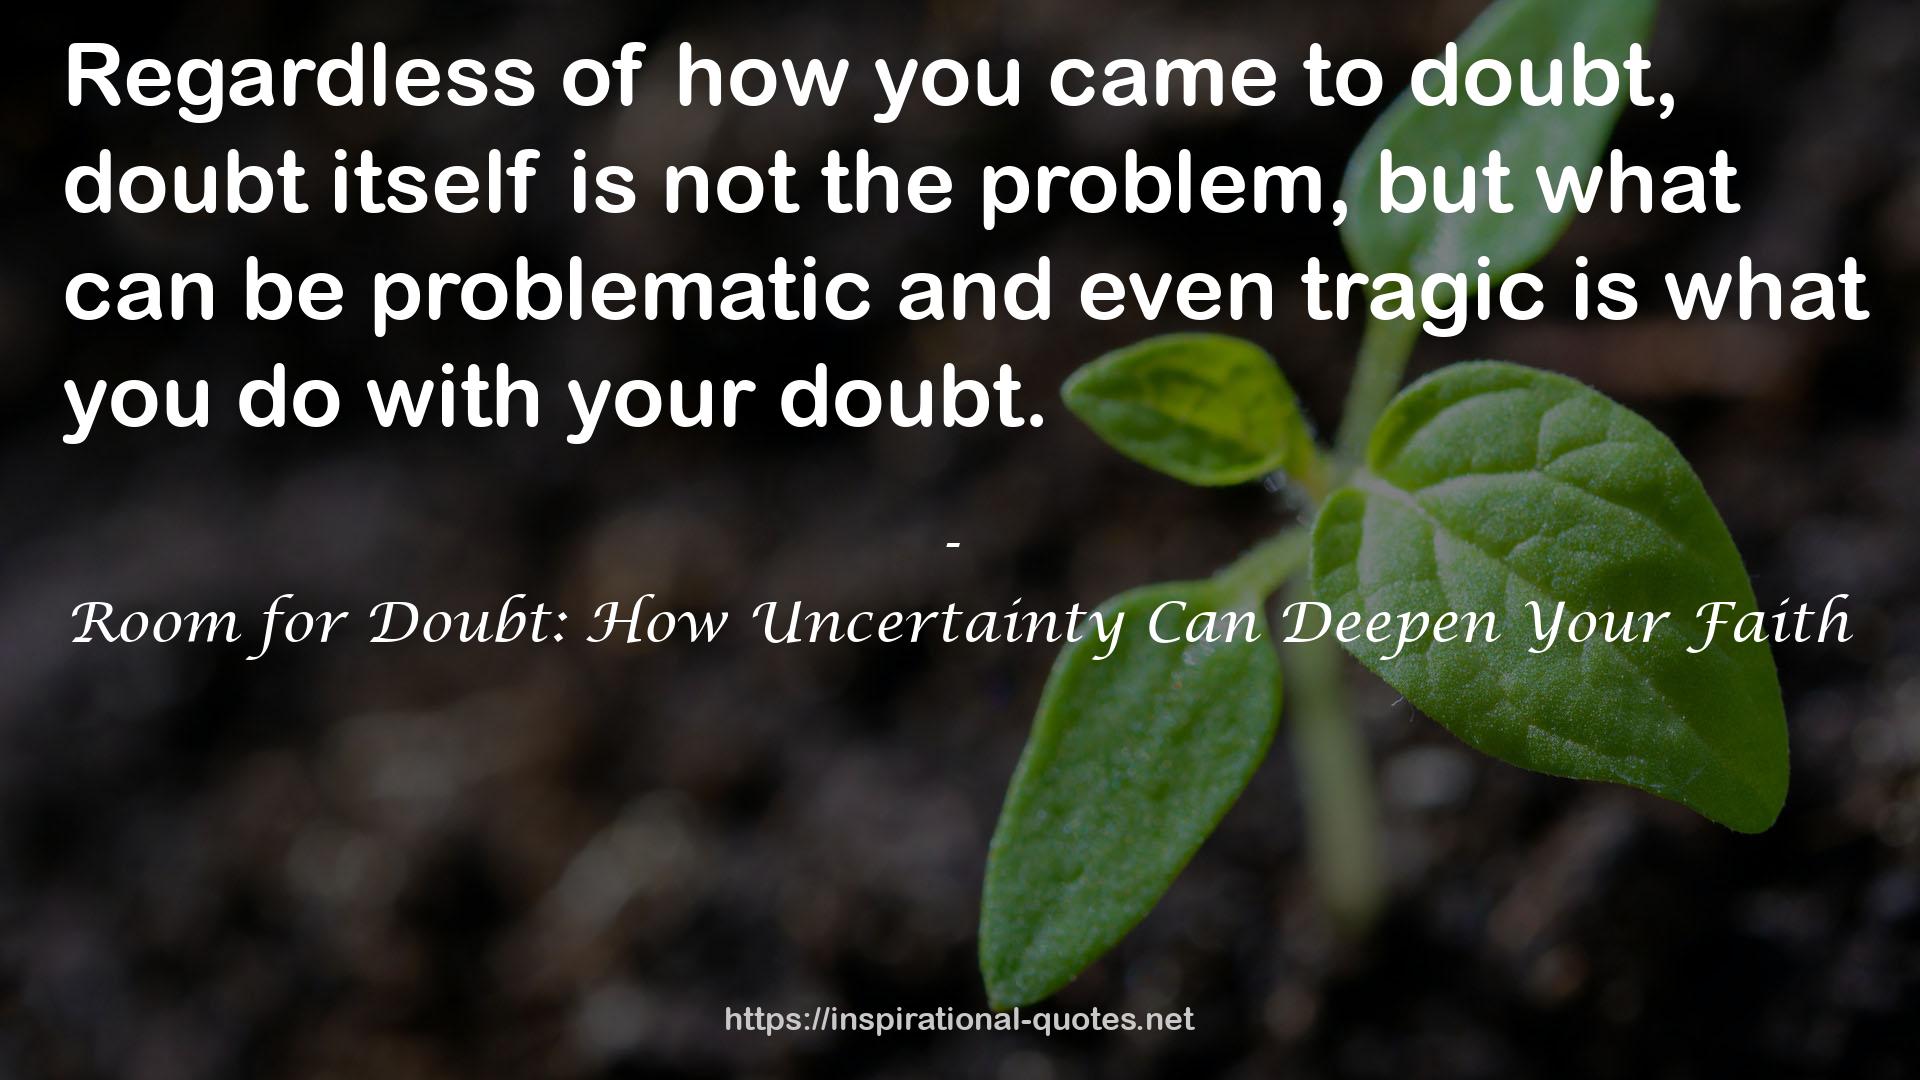 Room for Doubt: How Uncertainty Can Deepen Your Faith QUOTES